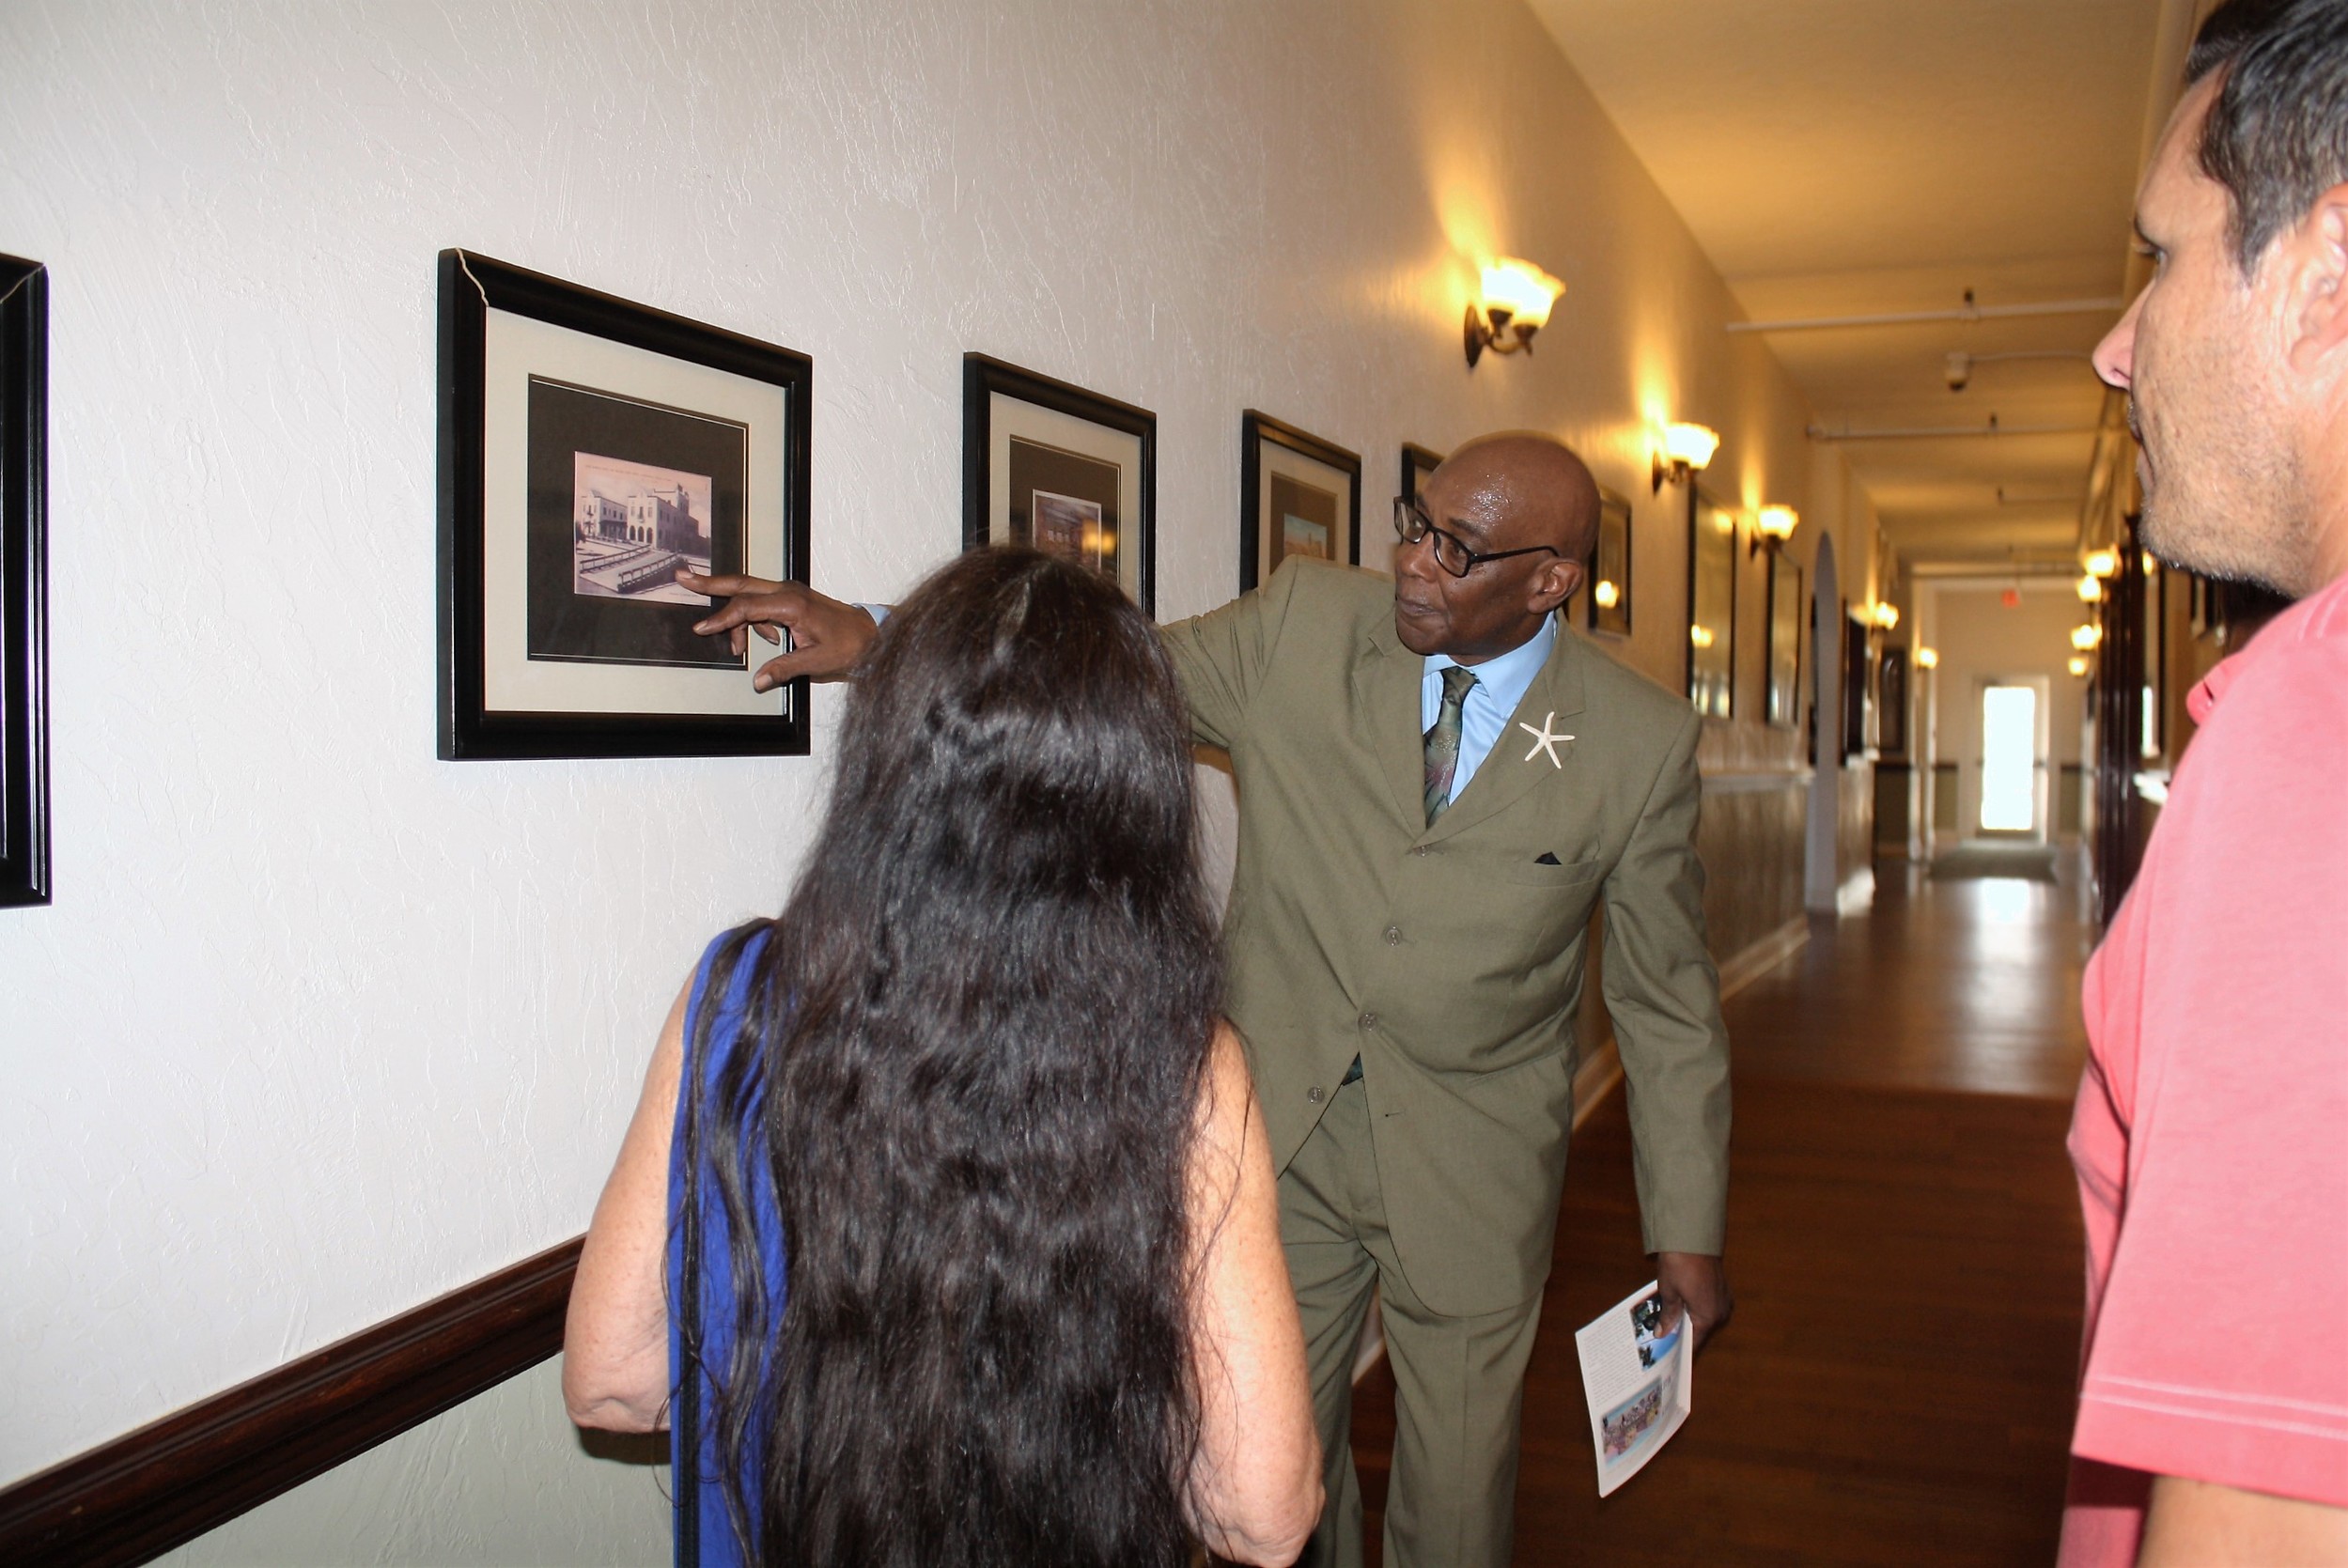 Casa Marina Maitre d' Sterling Joyce leads guests on a tour of the historic hotel